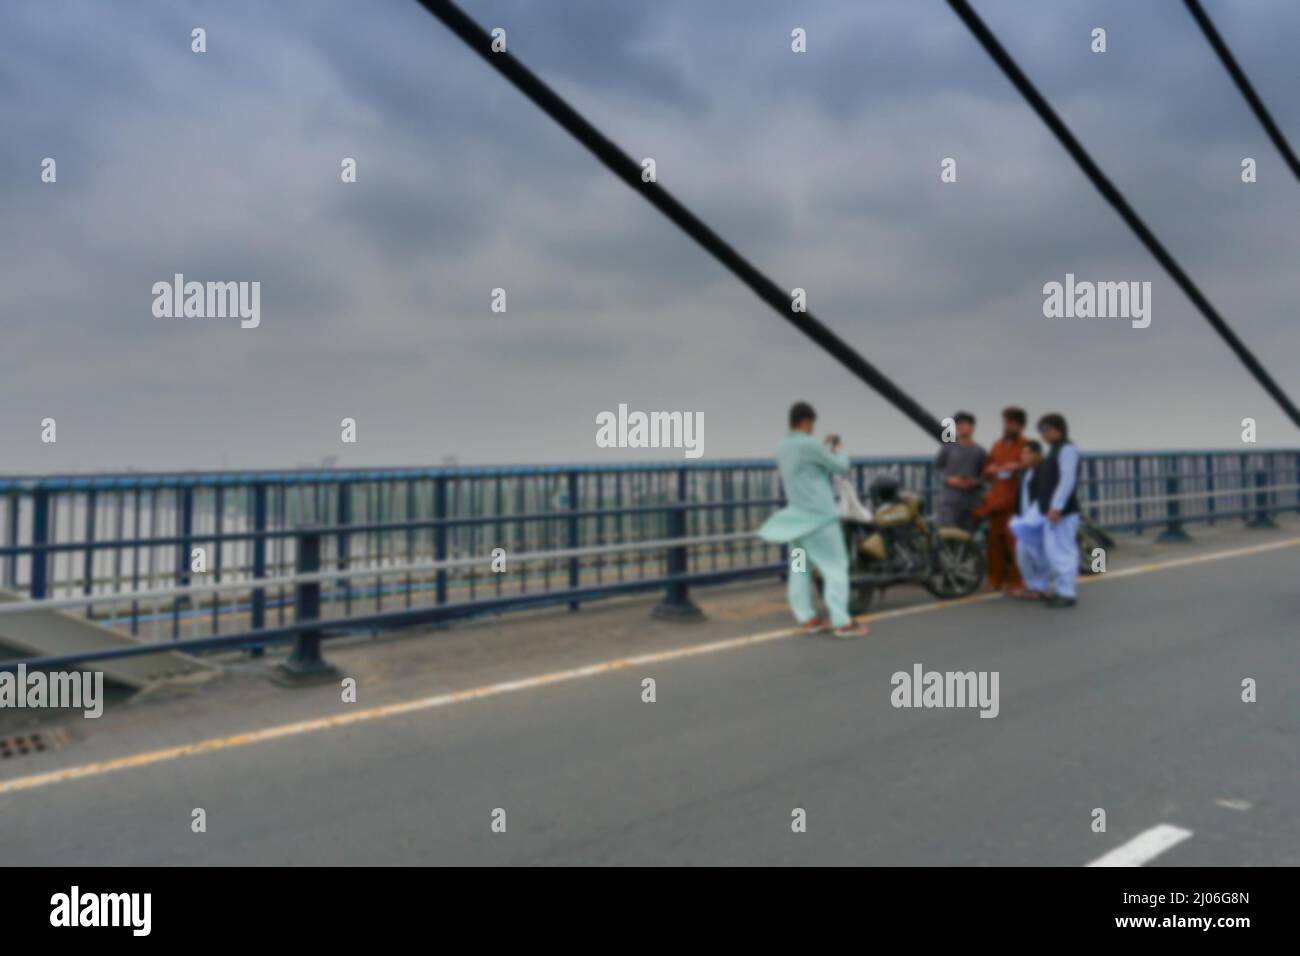 Blurred image of Kolkata, West Bengal, India. Young Muslim men taking picture of themselves on 2nd Hoogly Bridge. Stock Photo